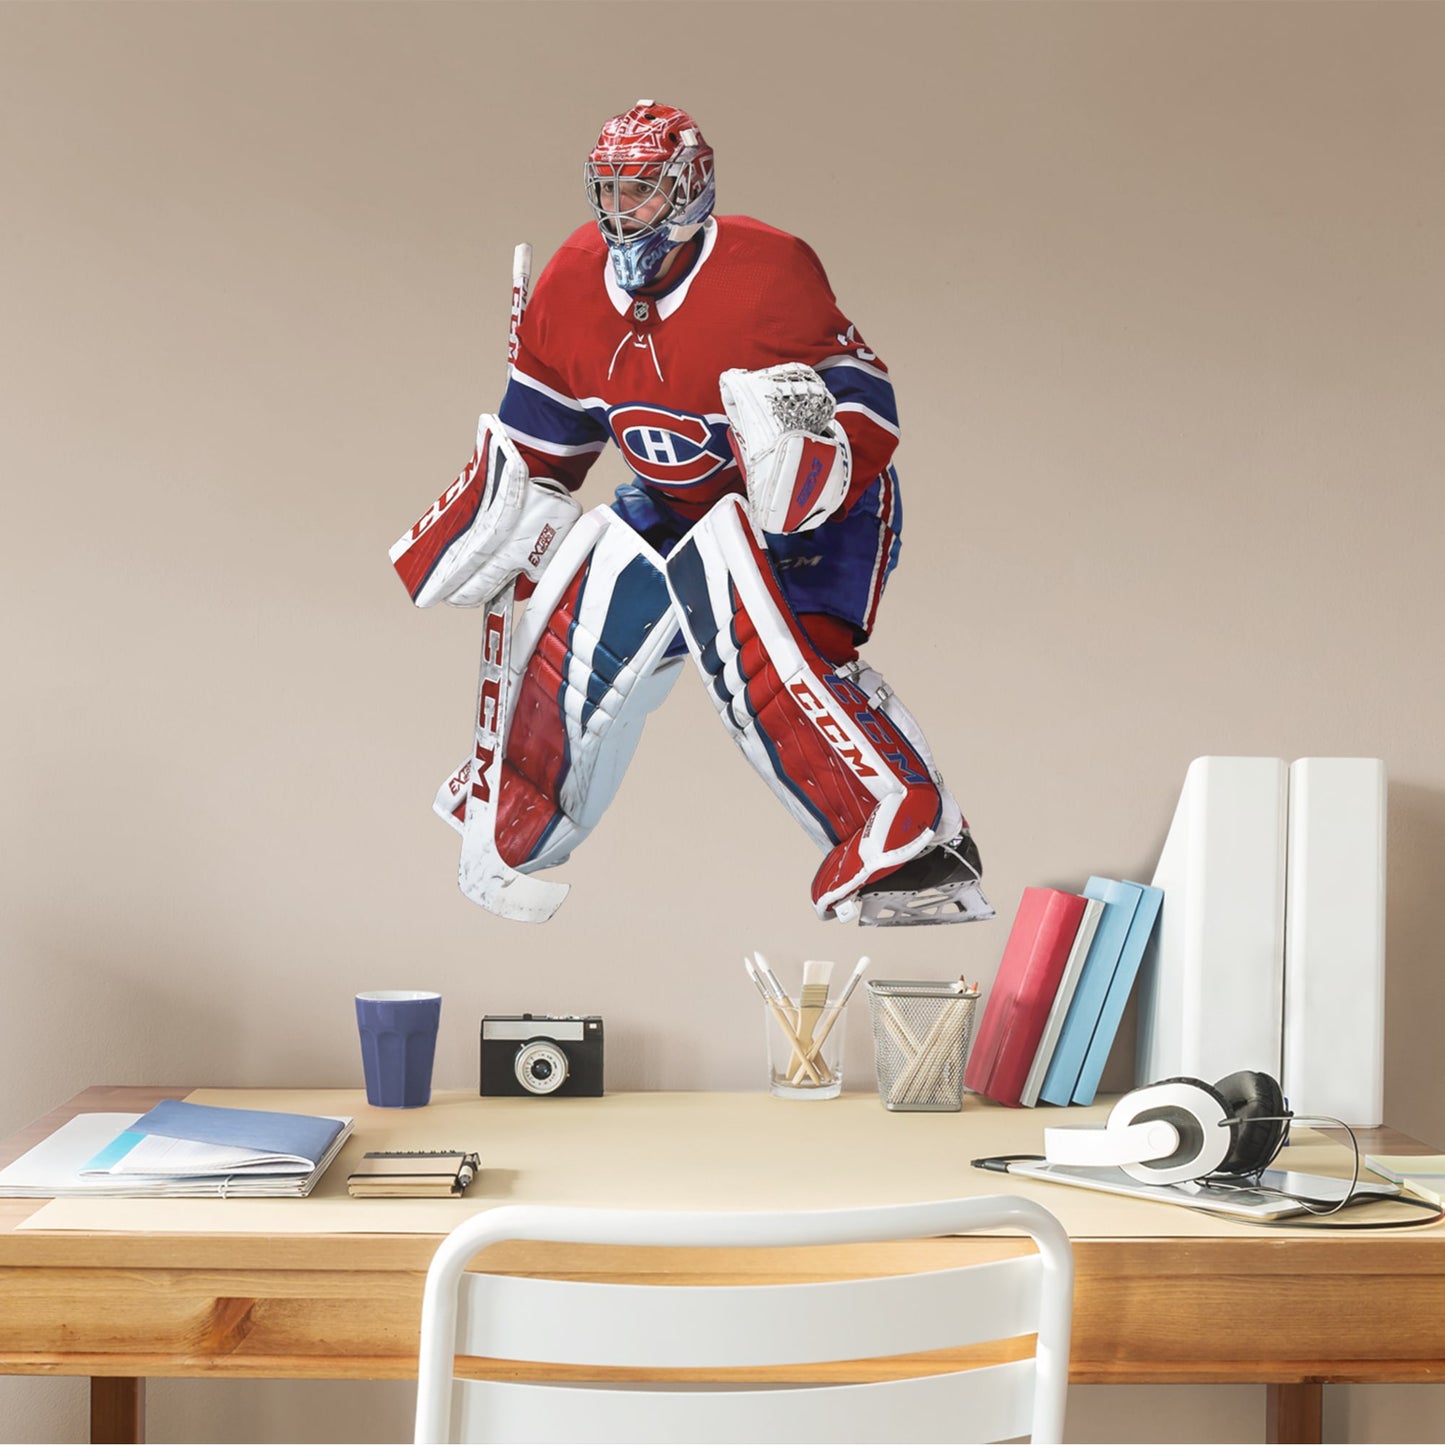 Featuring the repeat NHL All-Star - widely considered the greatest goaltender in the world - tending the goal in his trademark butterfly style, this reusable, high-quality decal resists rips, tears, and scoring attempts - and it won't damage the walls.